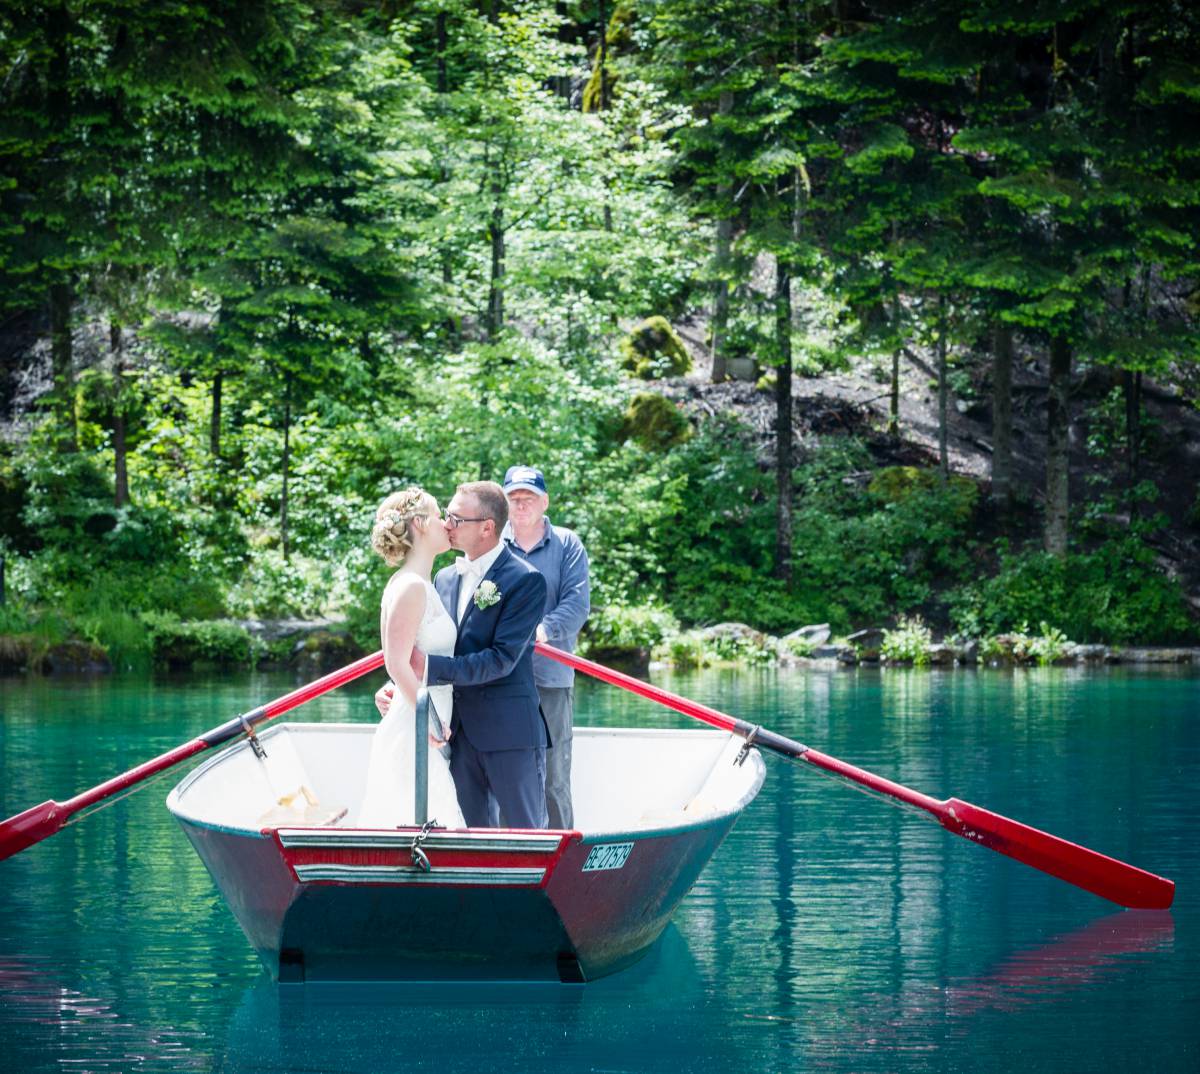  Weddings and parties at the Blausee in Switzerland